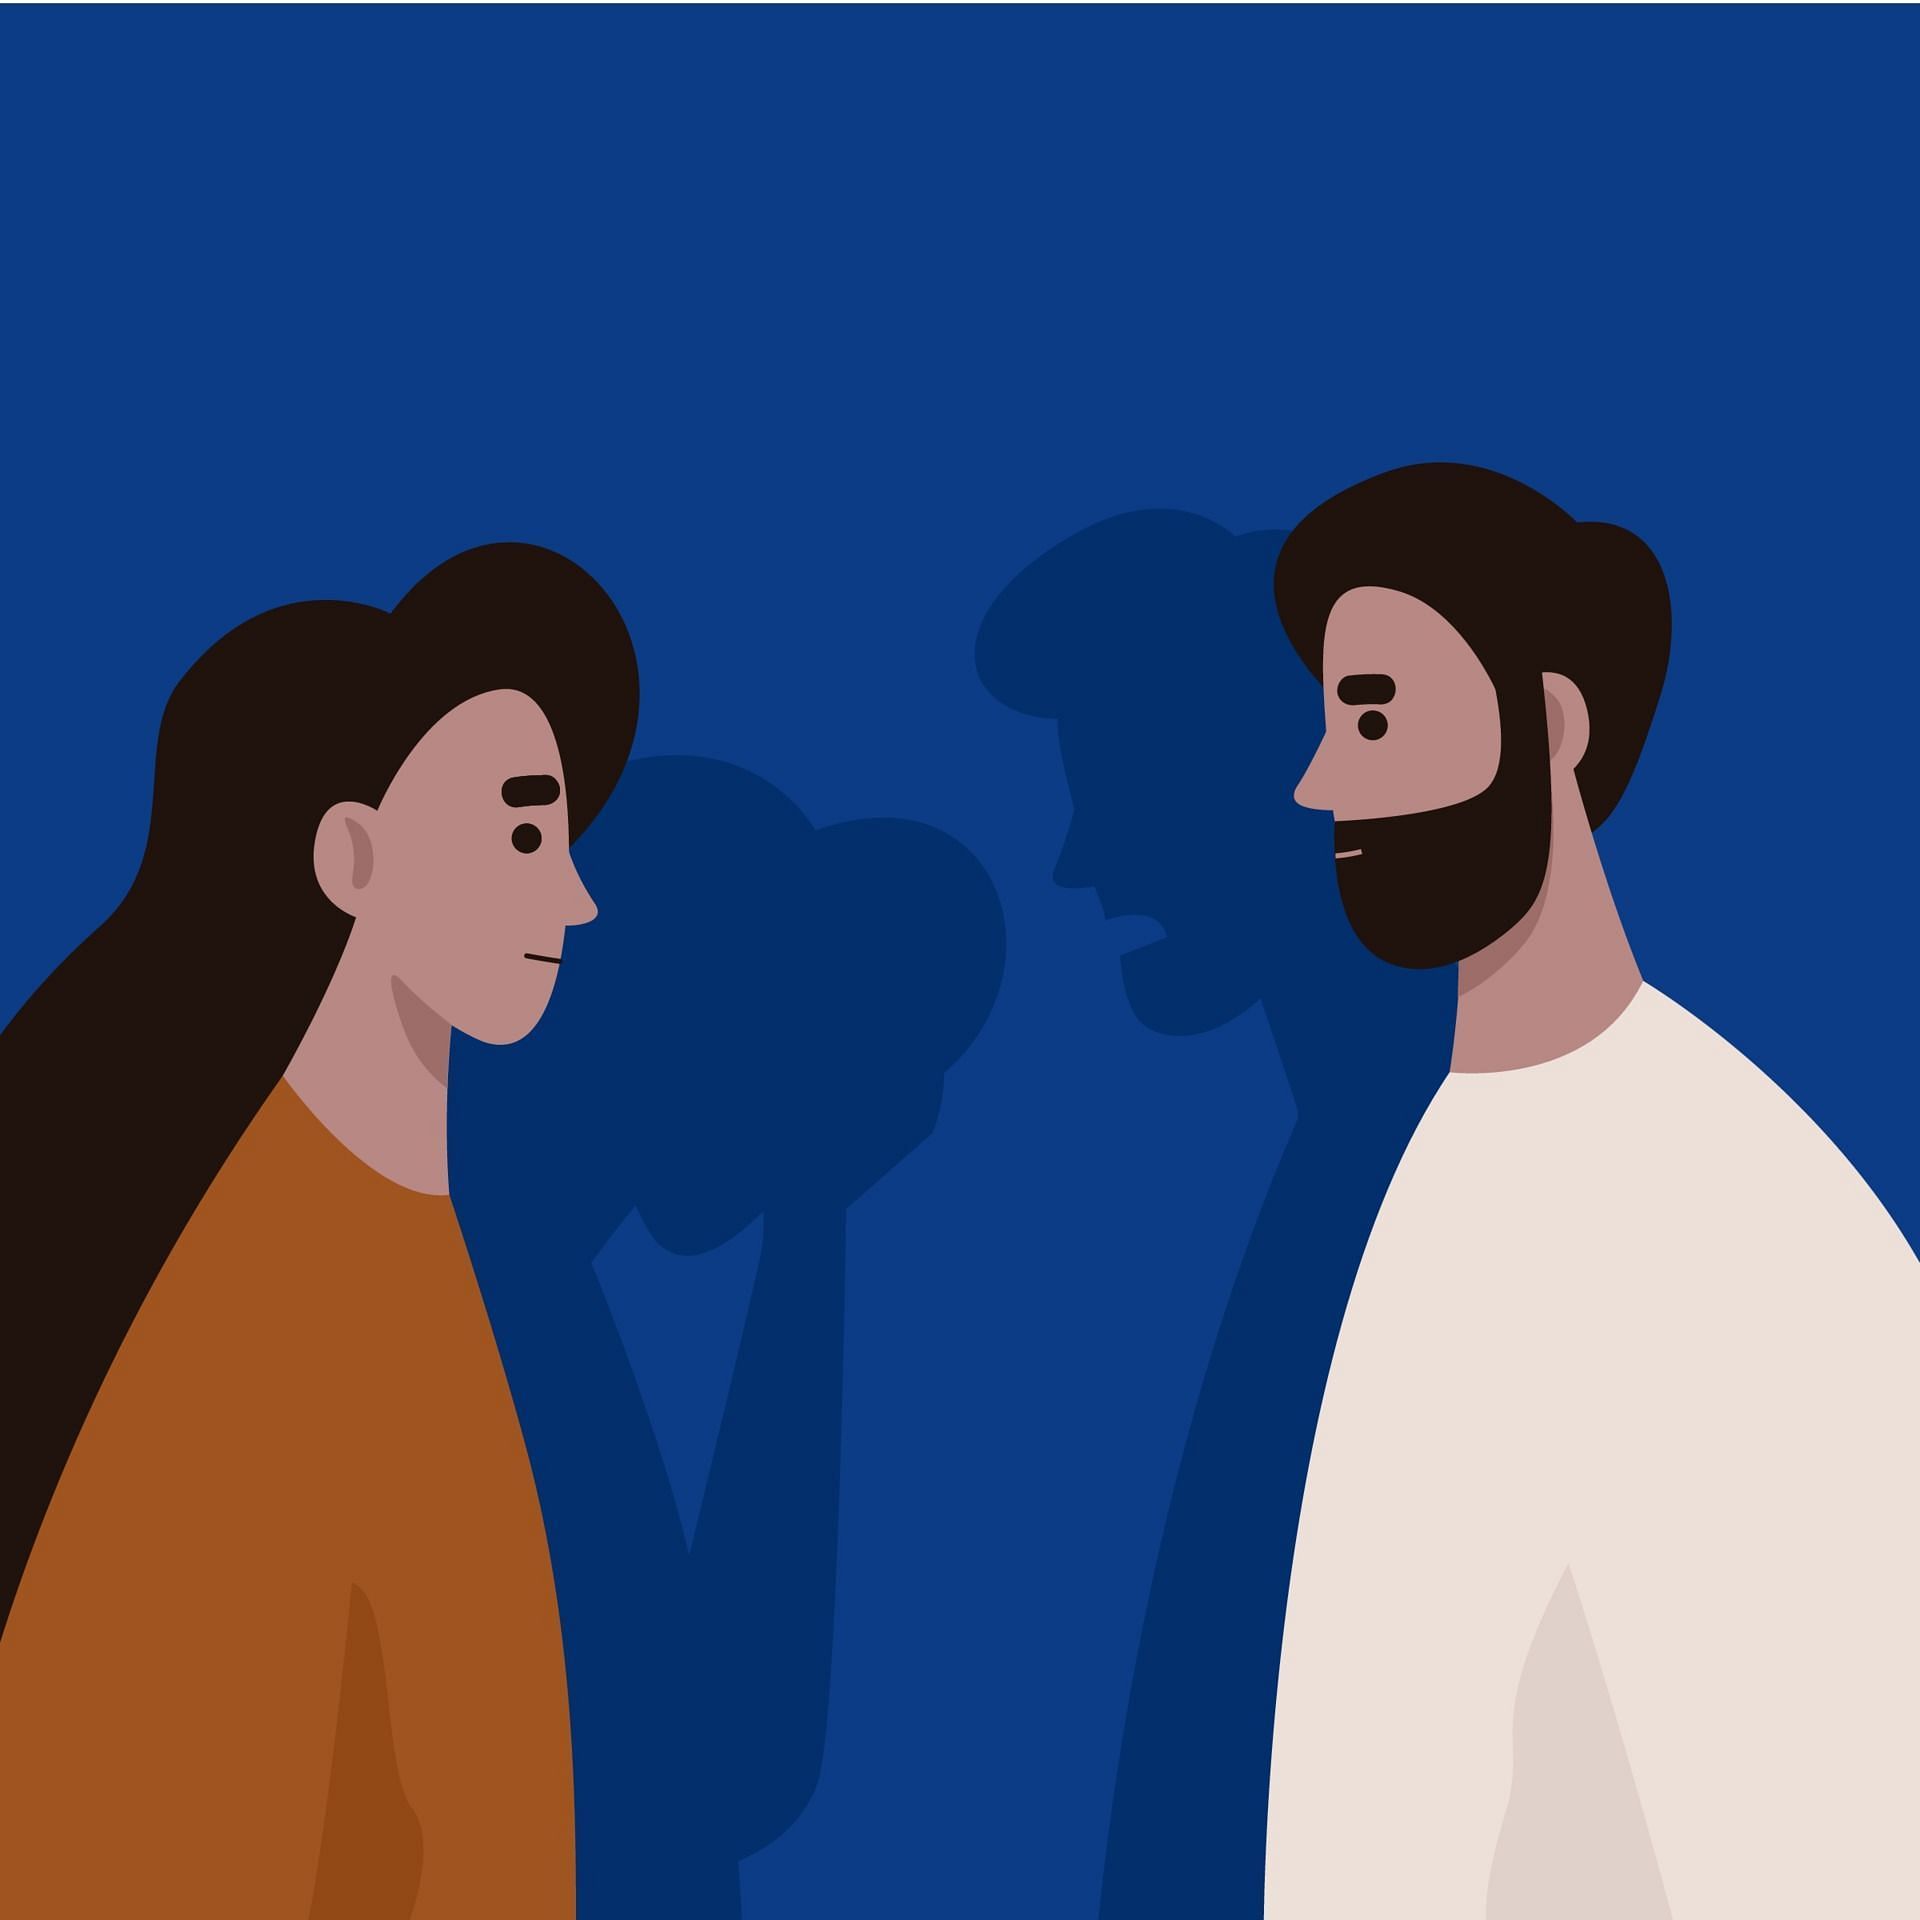 Patterns of gaslighting can be seen between any two people, but is majorly seen between couples. (Image via Vecteezy/ hola illustrations)